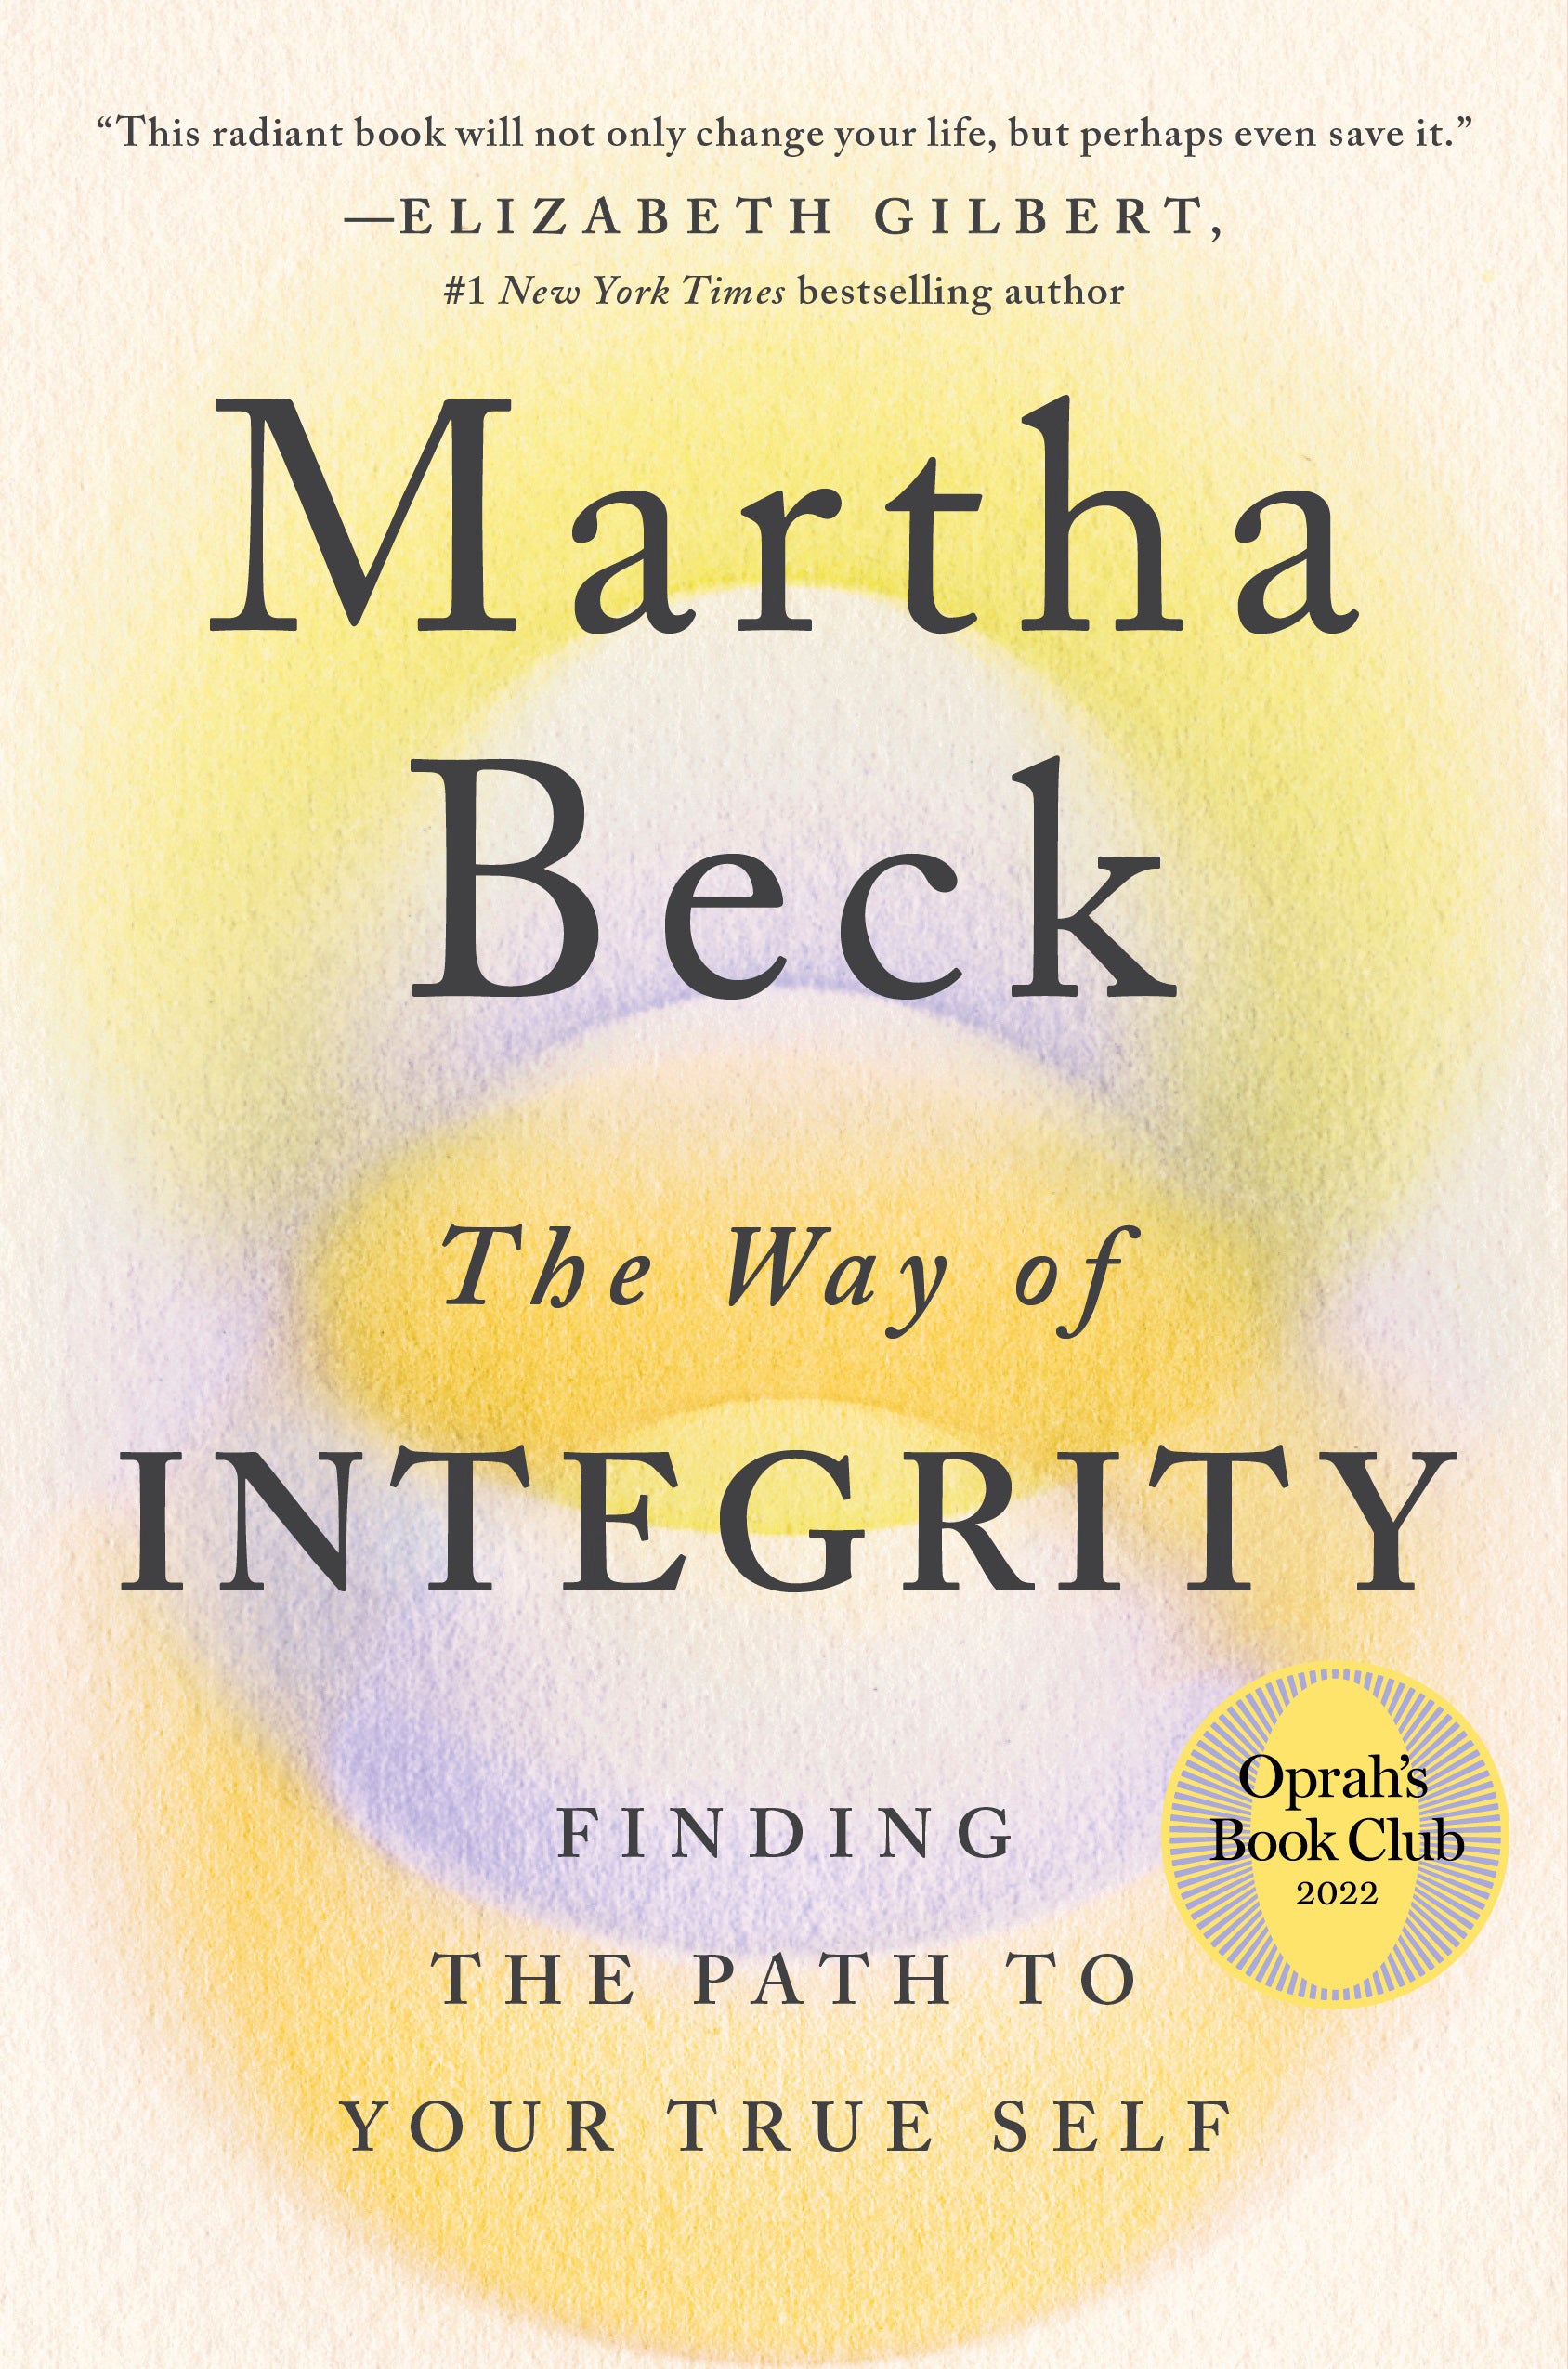 Books - The Way of Integrity: Finding the Path to Your True Self